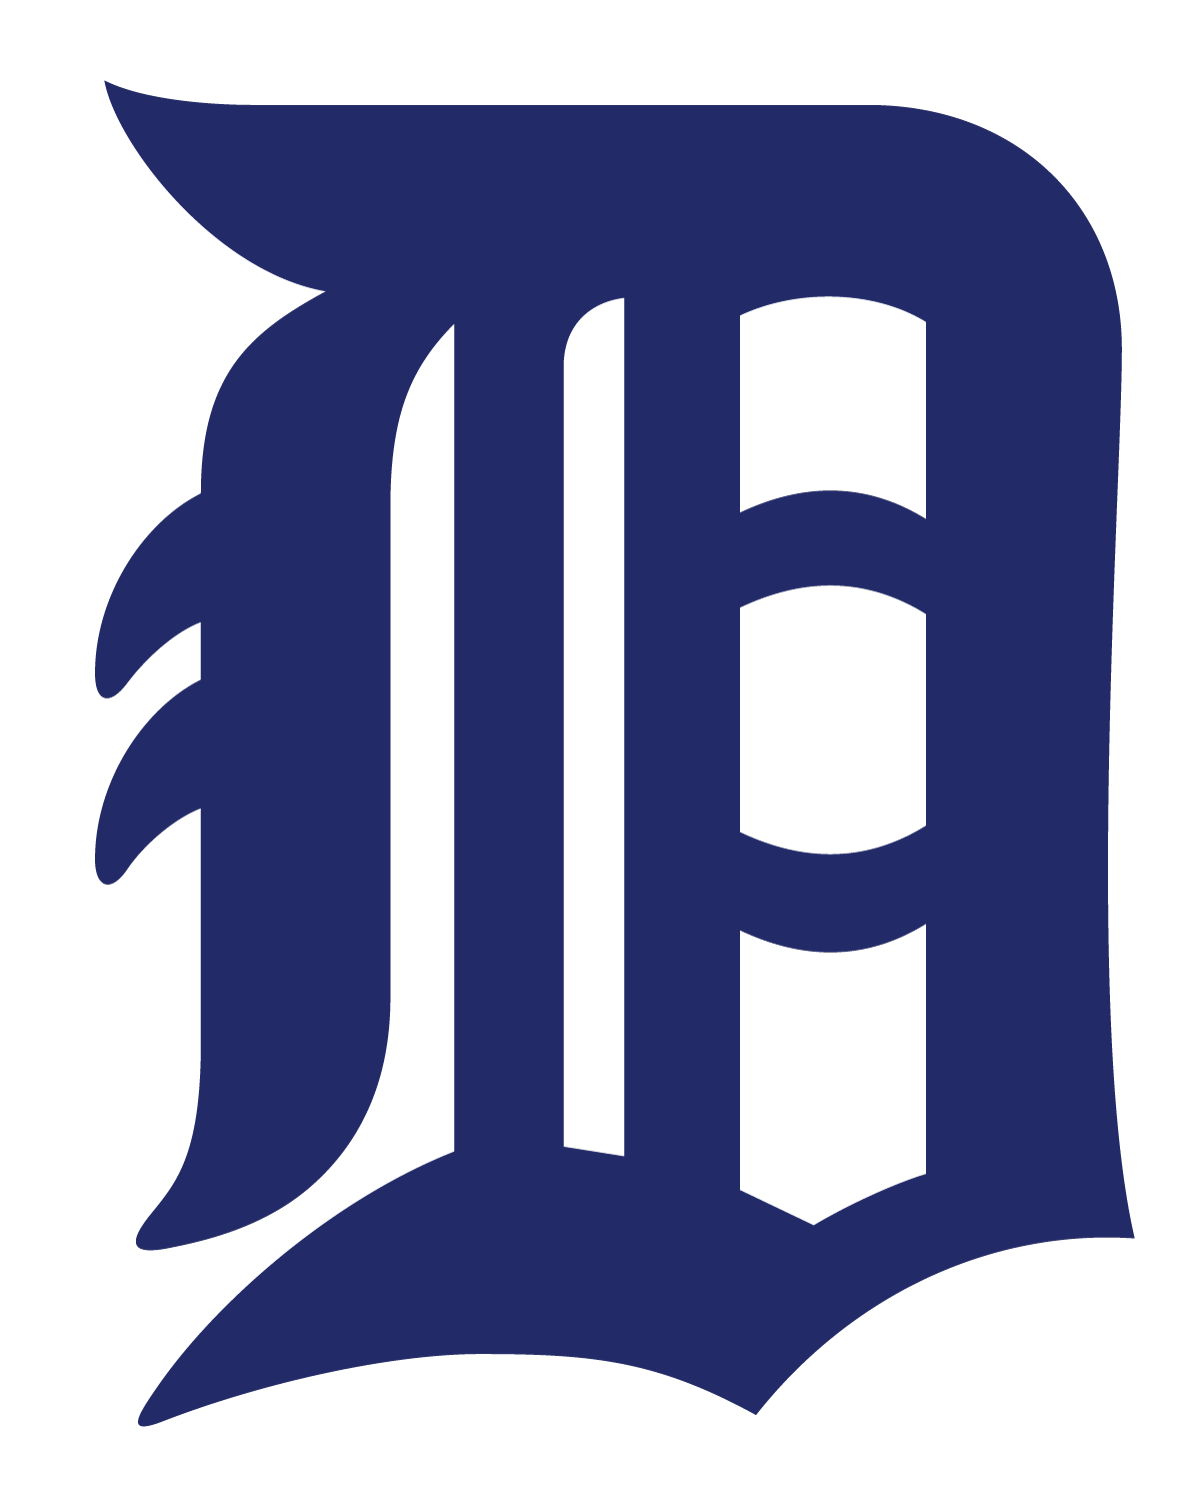 Tigers Logo Png - Clip Art Library